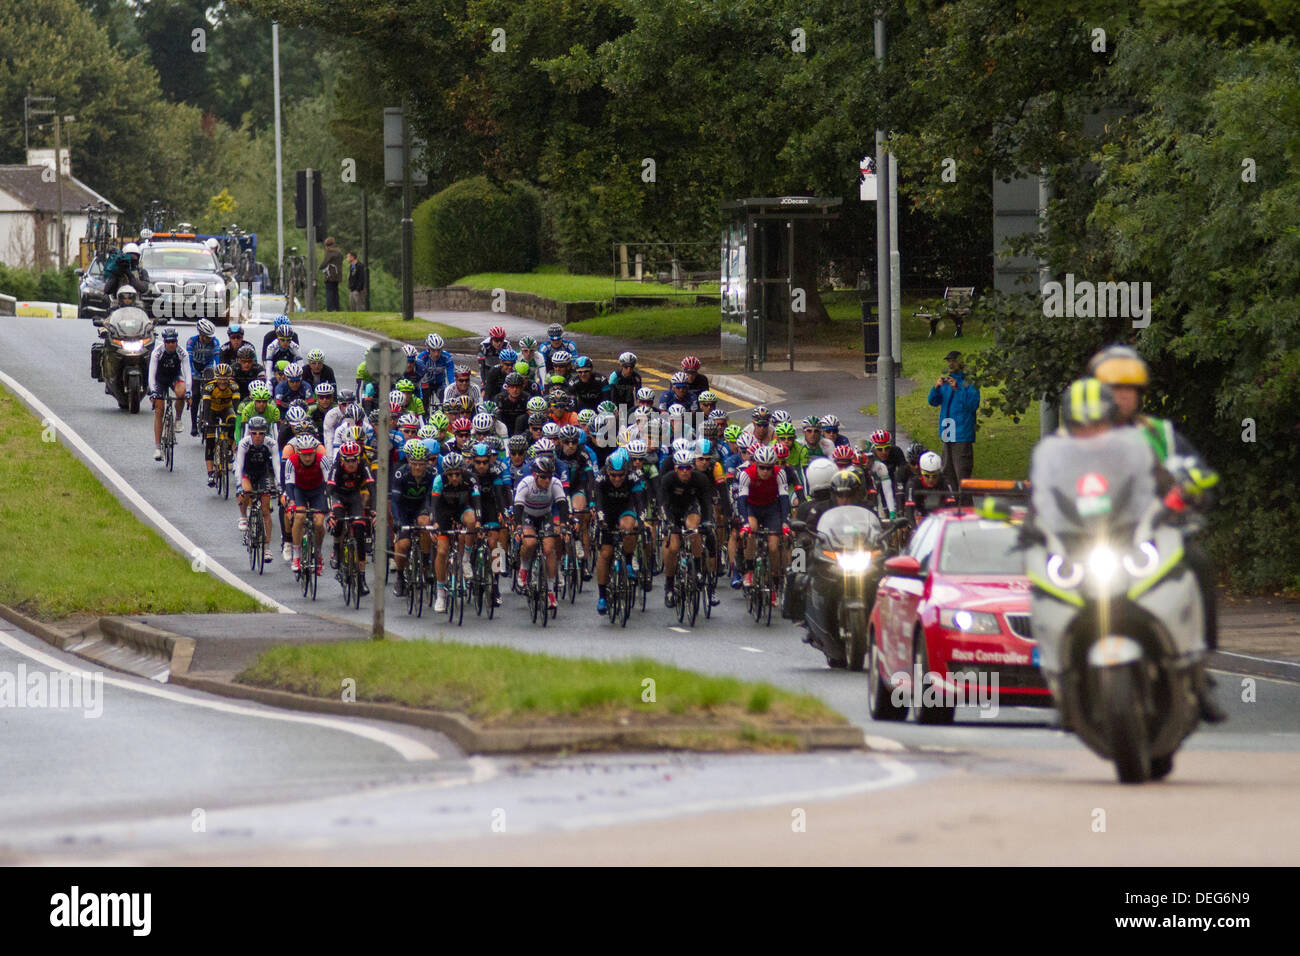 Stoke on Trent, Staffordshire, UK. 18th Sep, 2013. Cyclists pass through the Trentham area of Stoke on Trent, Staffordshire on stage 4 of the Tour of Britain, starting in Stoke on Trent and finishing in Llanberis in Wales. Credit:  Alex Williams/Alamy Live News Stock Photo